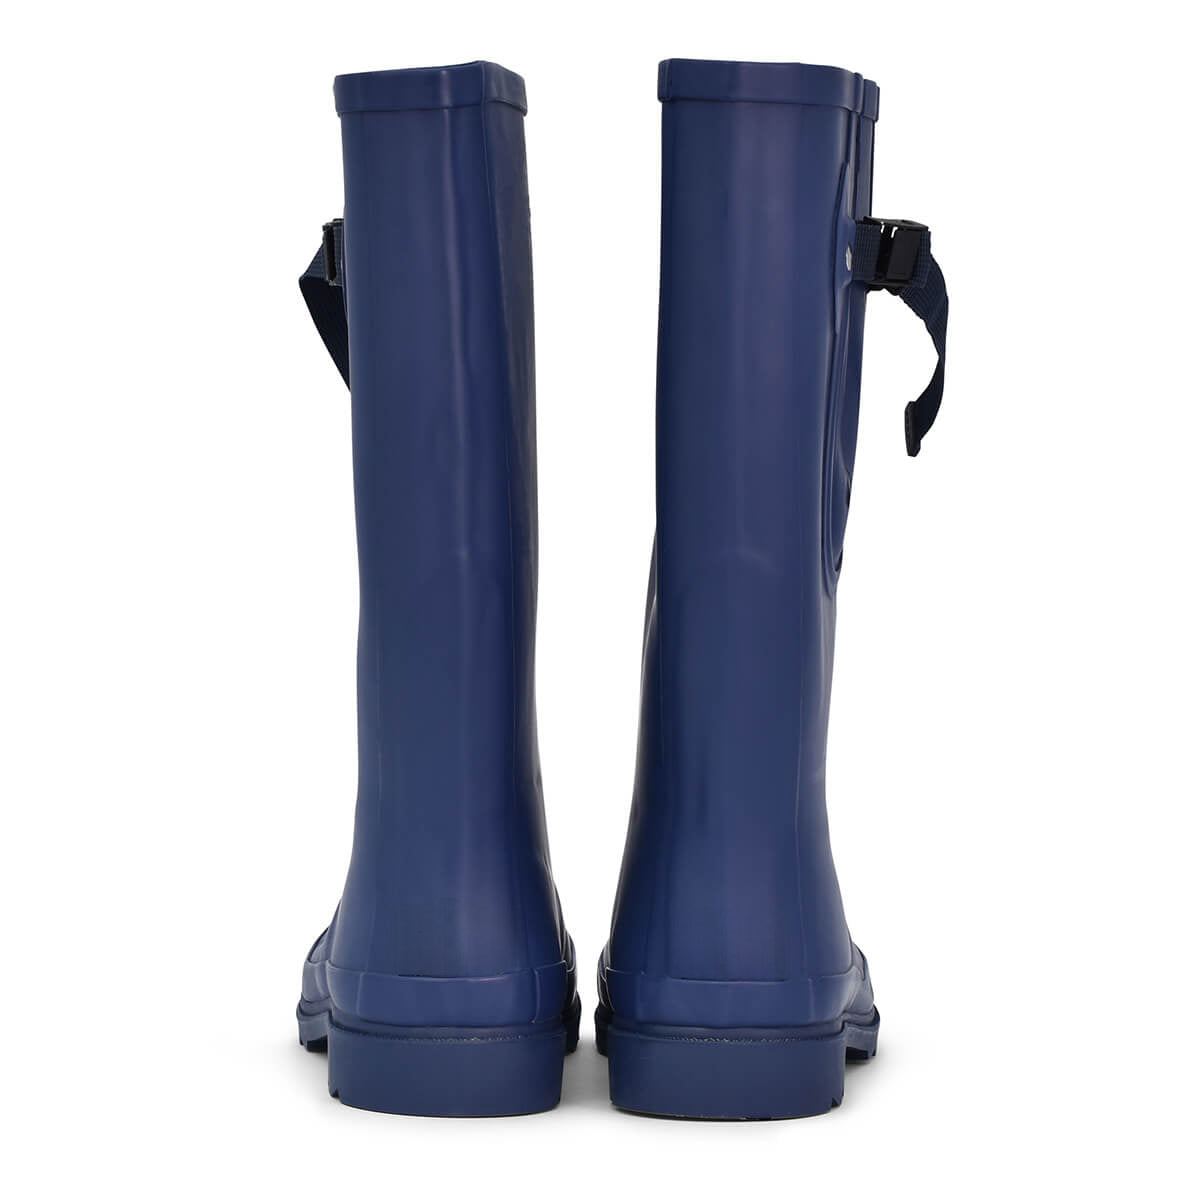 Navy Blue Classic Unisex Wide Calf Wellies – up to 50cm calf